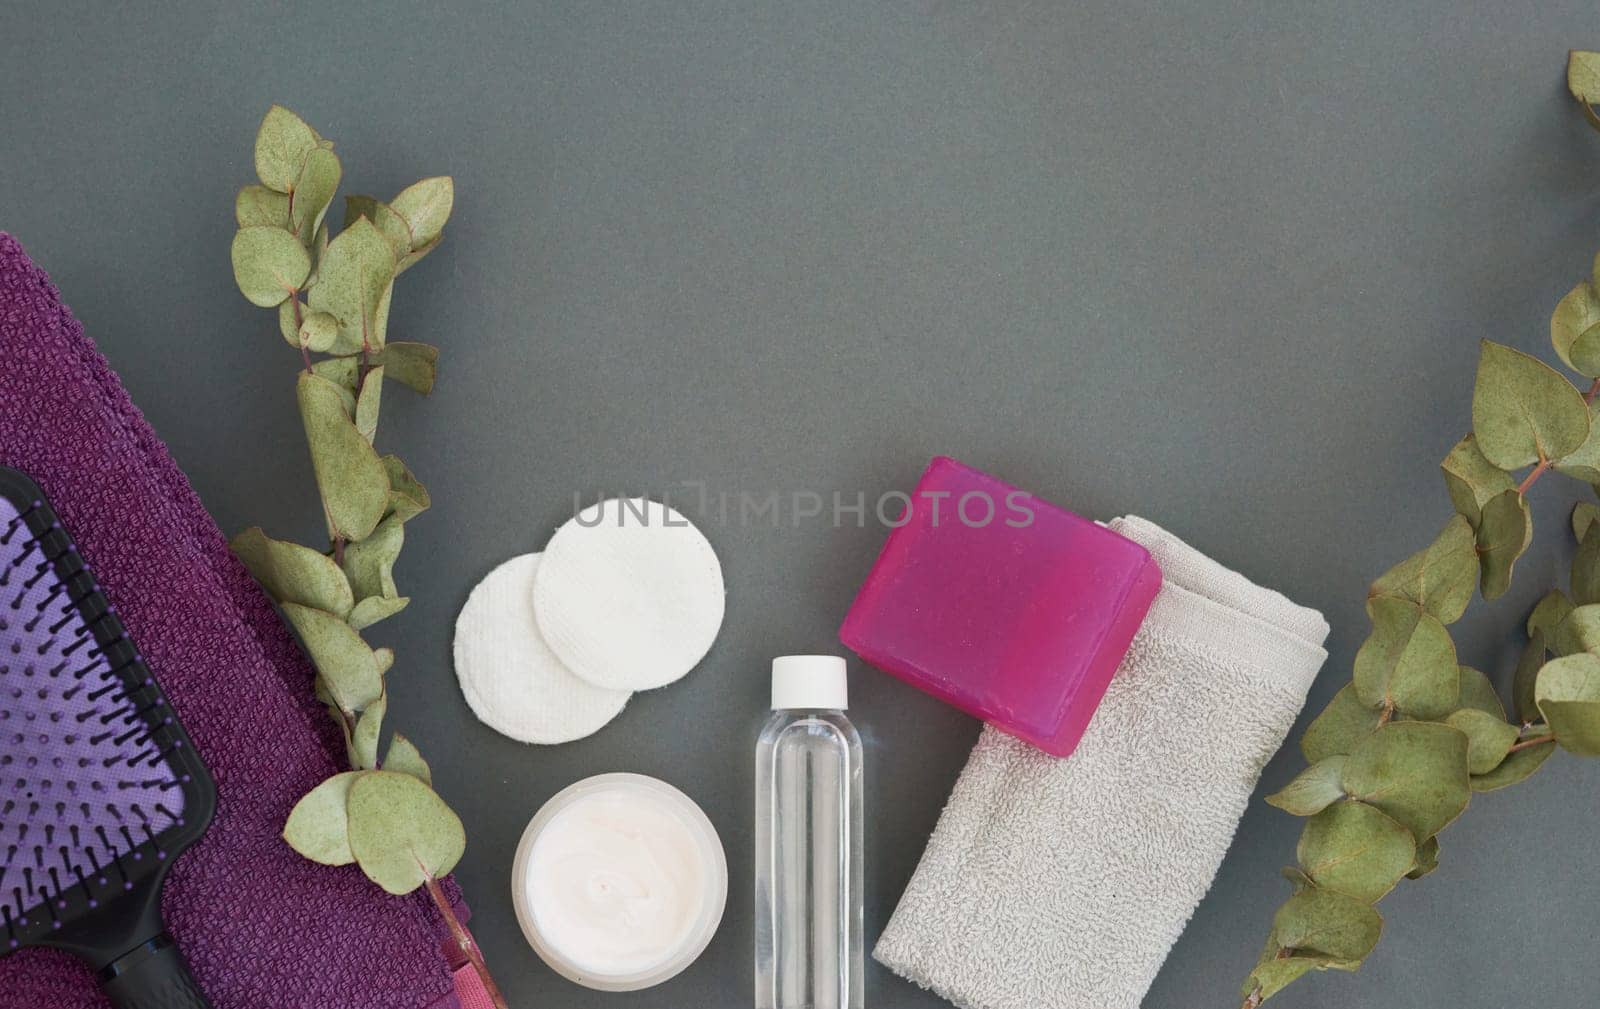 Spa, beauty equipment and above with skincare, eco friendly and cruelty free treatment products. Cosmetics, soap and natural fiber cloth for washing and shower routine with grey background and plants.